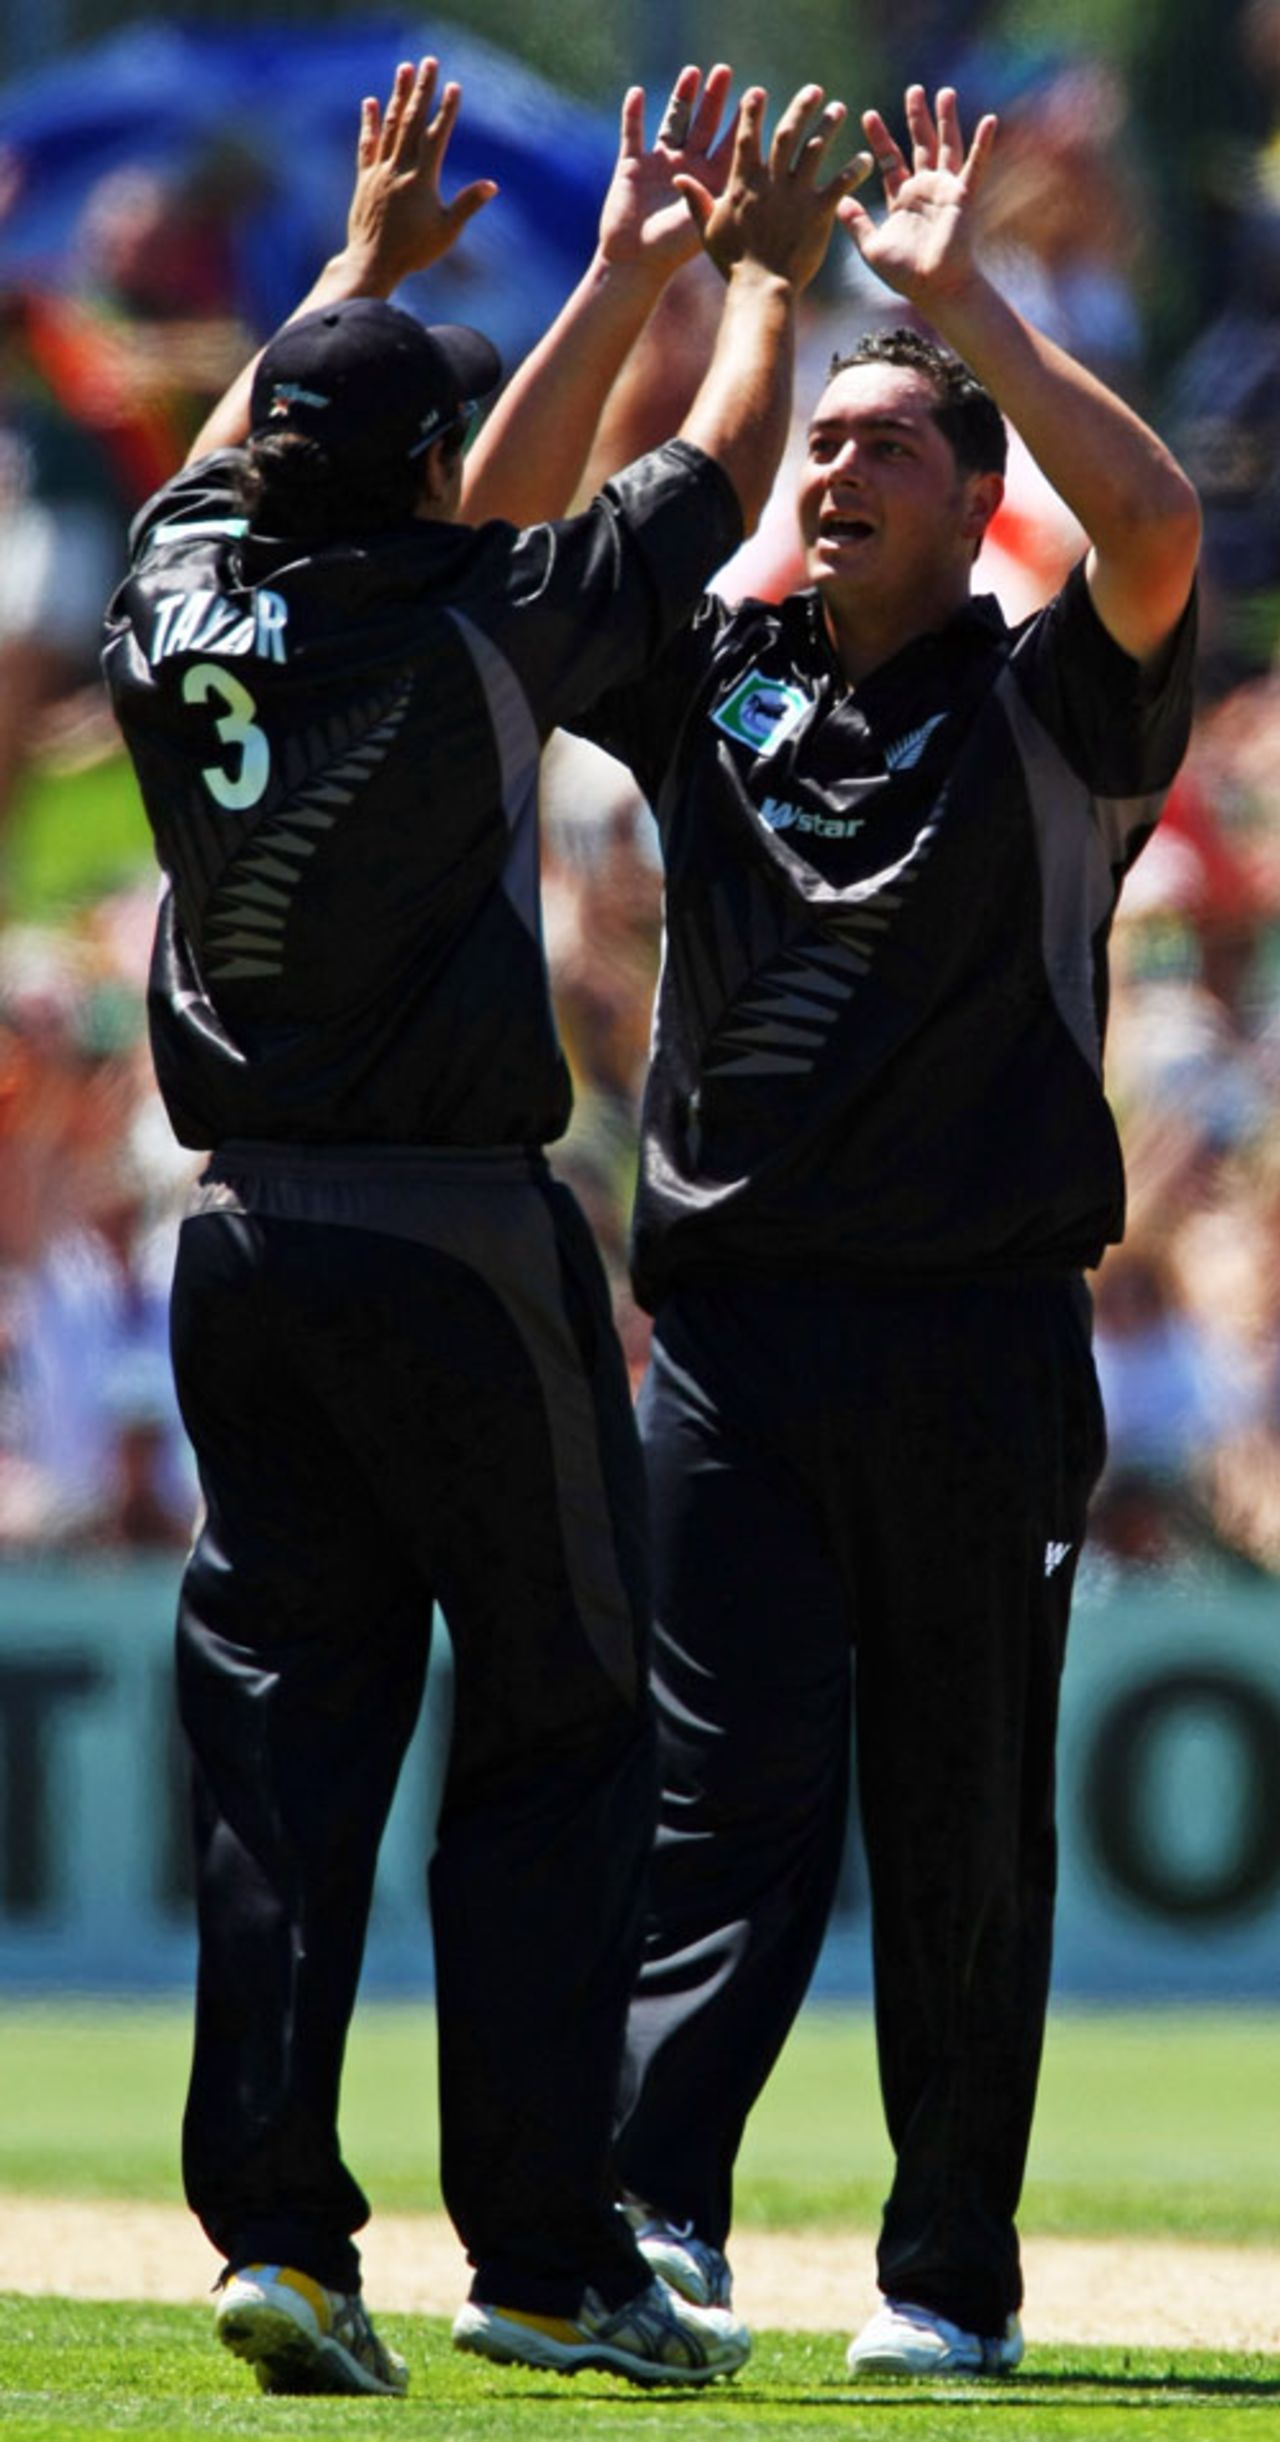 Jesse Ryder takes a high five after his second wicket in as many deliveries, New Zealand v England, 4th ODI, Napier, February 20, 2008